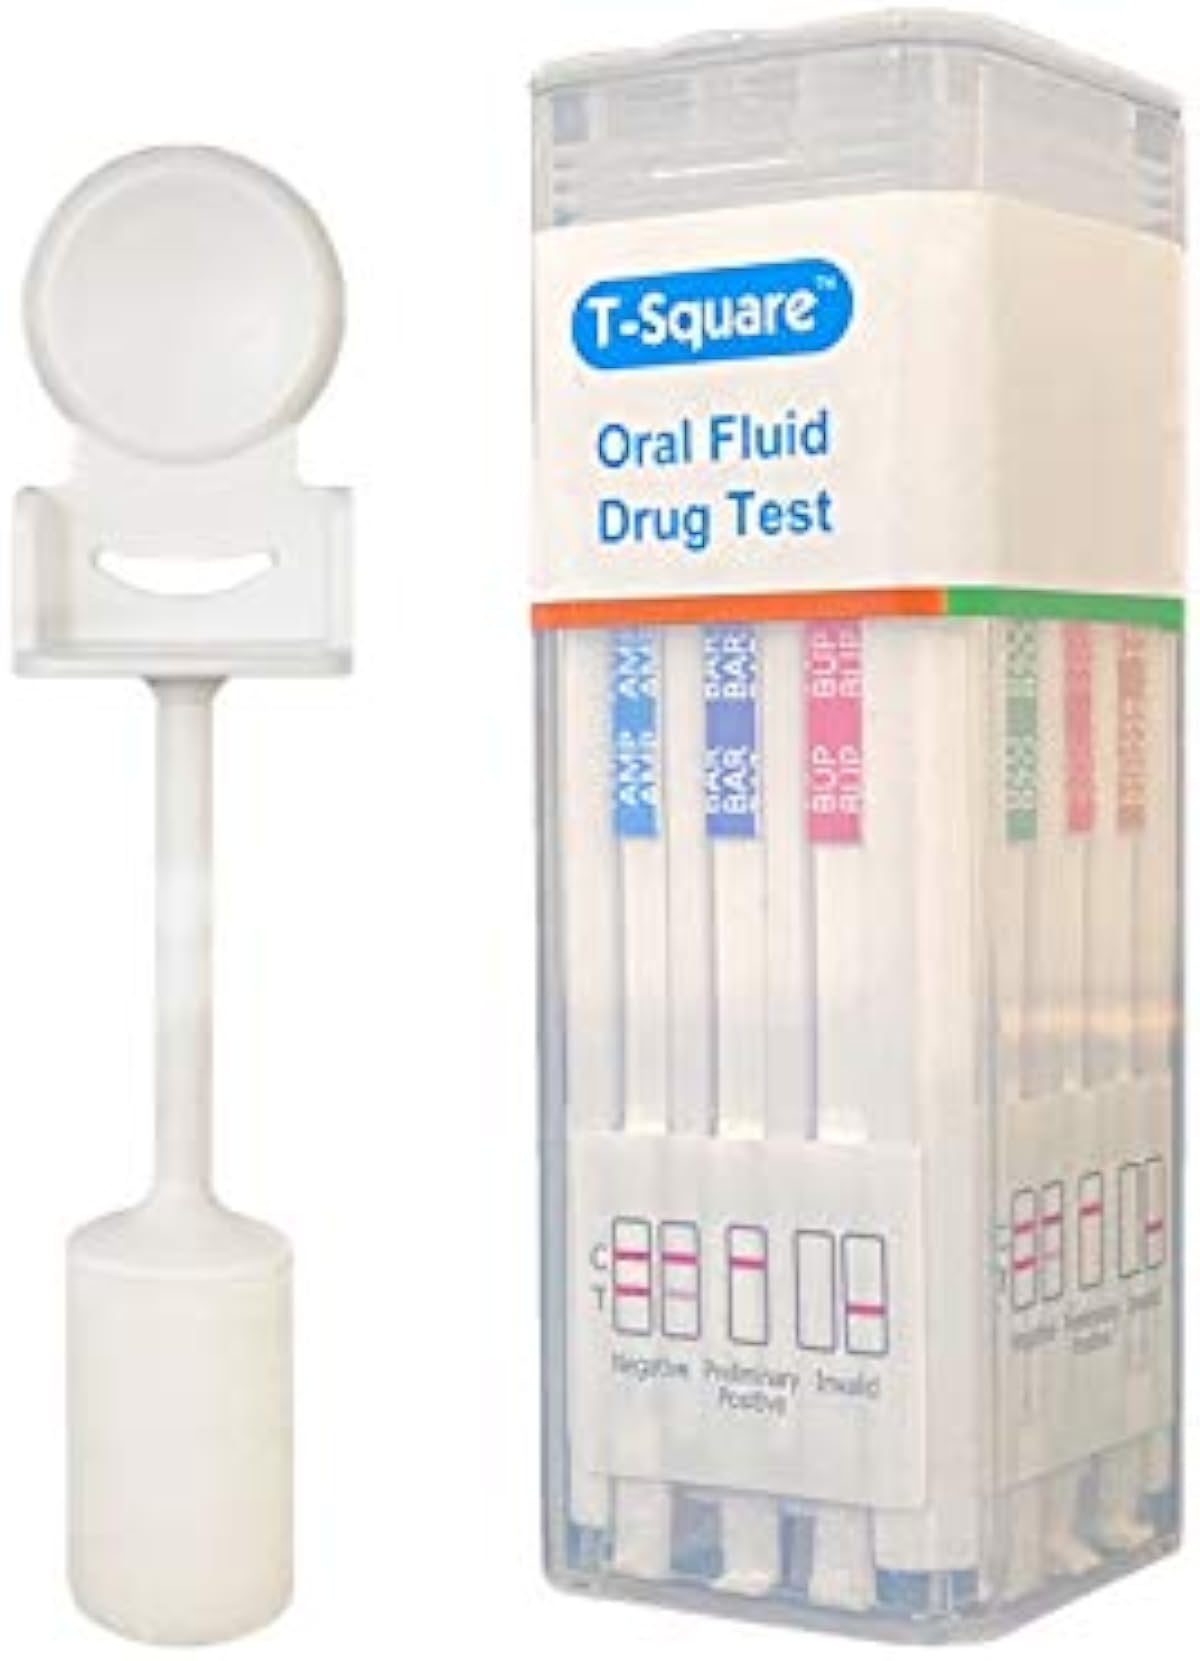 Prime Screen [5 Pack] 12 Panel Saliva Oral Fluid Test Kit, No Saturation Indicator (AMP, BAR, BUP, BZO, COC, MDMA, MET, MTD, OPI, OXY, PCP, THC) - QODOA-6126